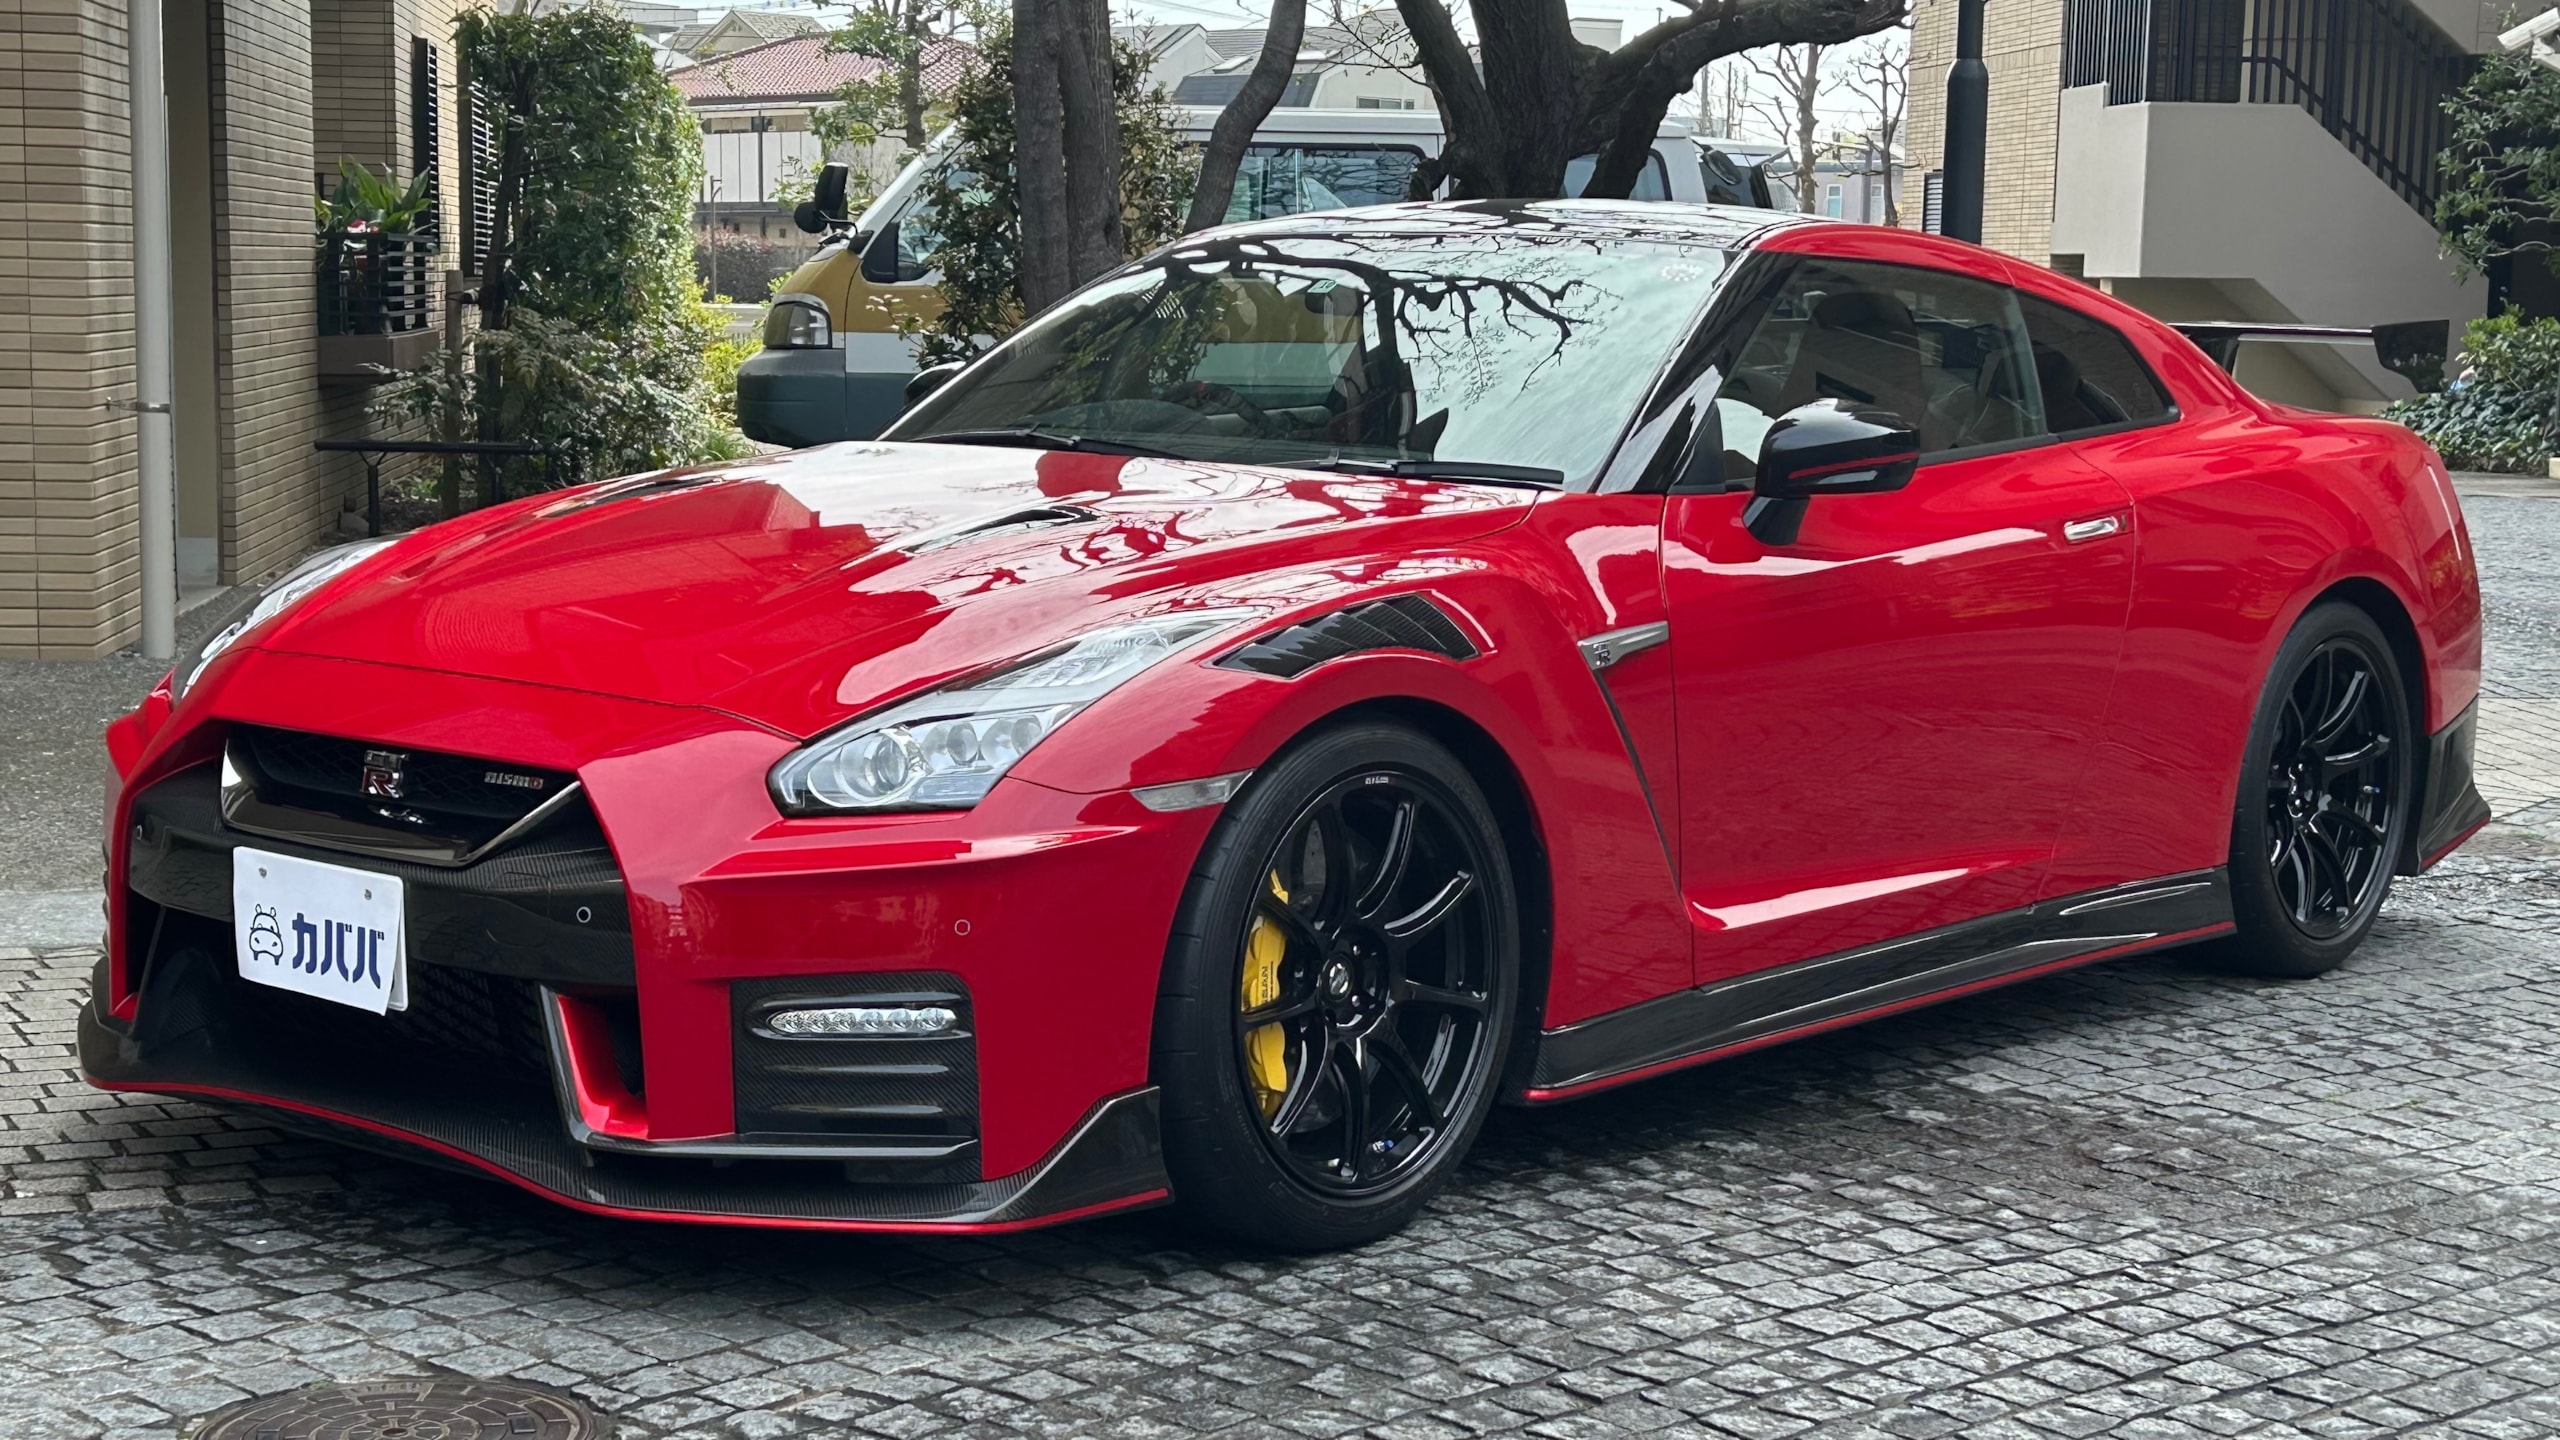 GT-R 3.8 NISMO 4WD(日産)2019年式 2600万円の中古車 - 自動車フリマ